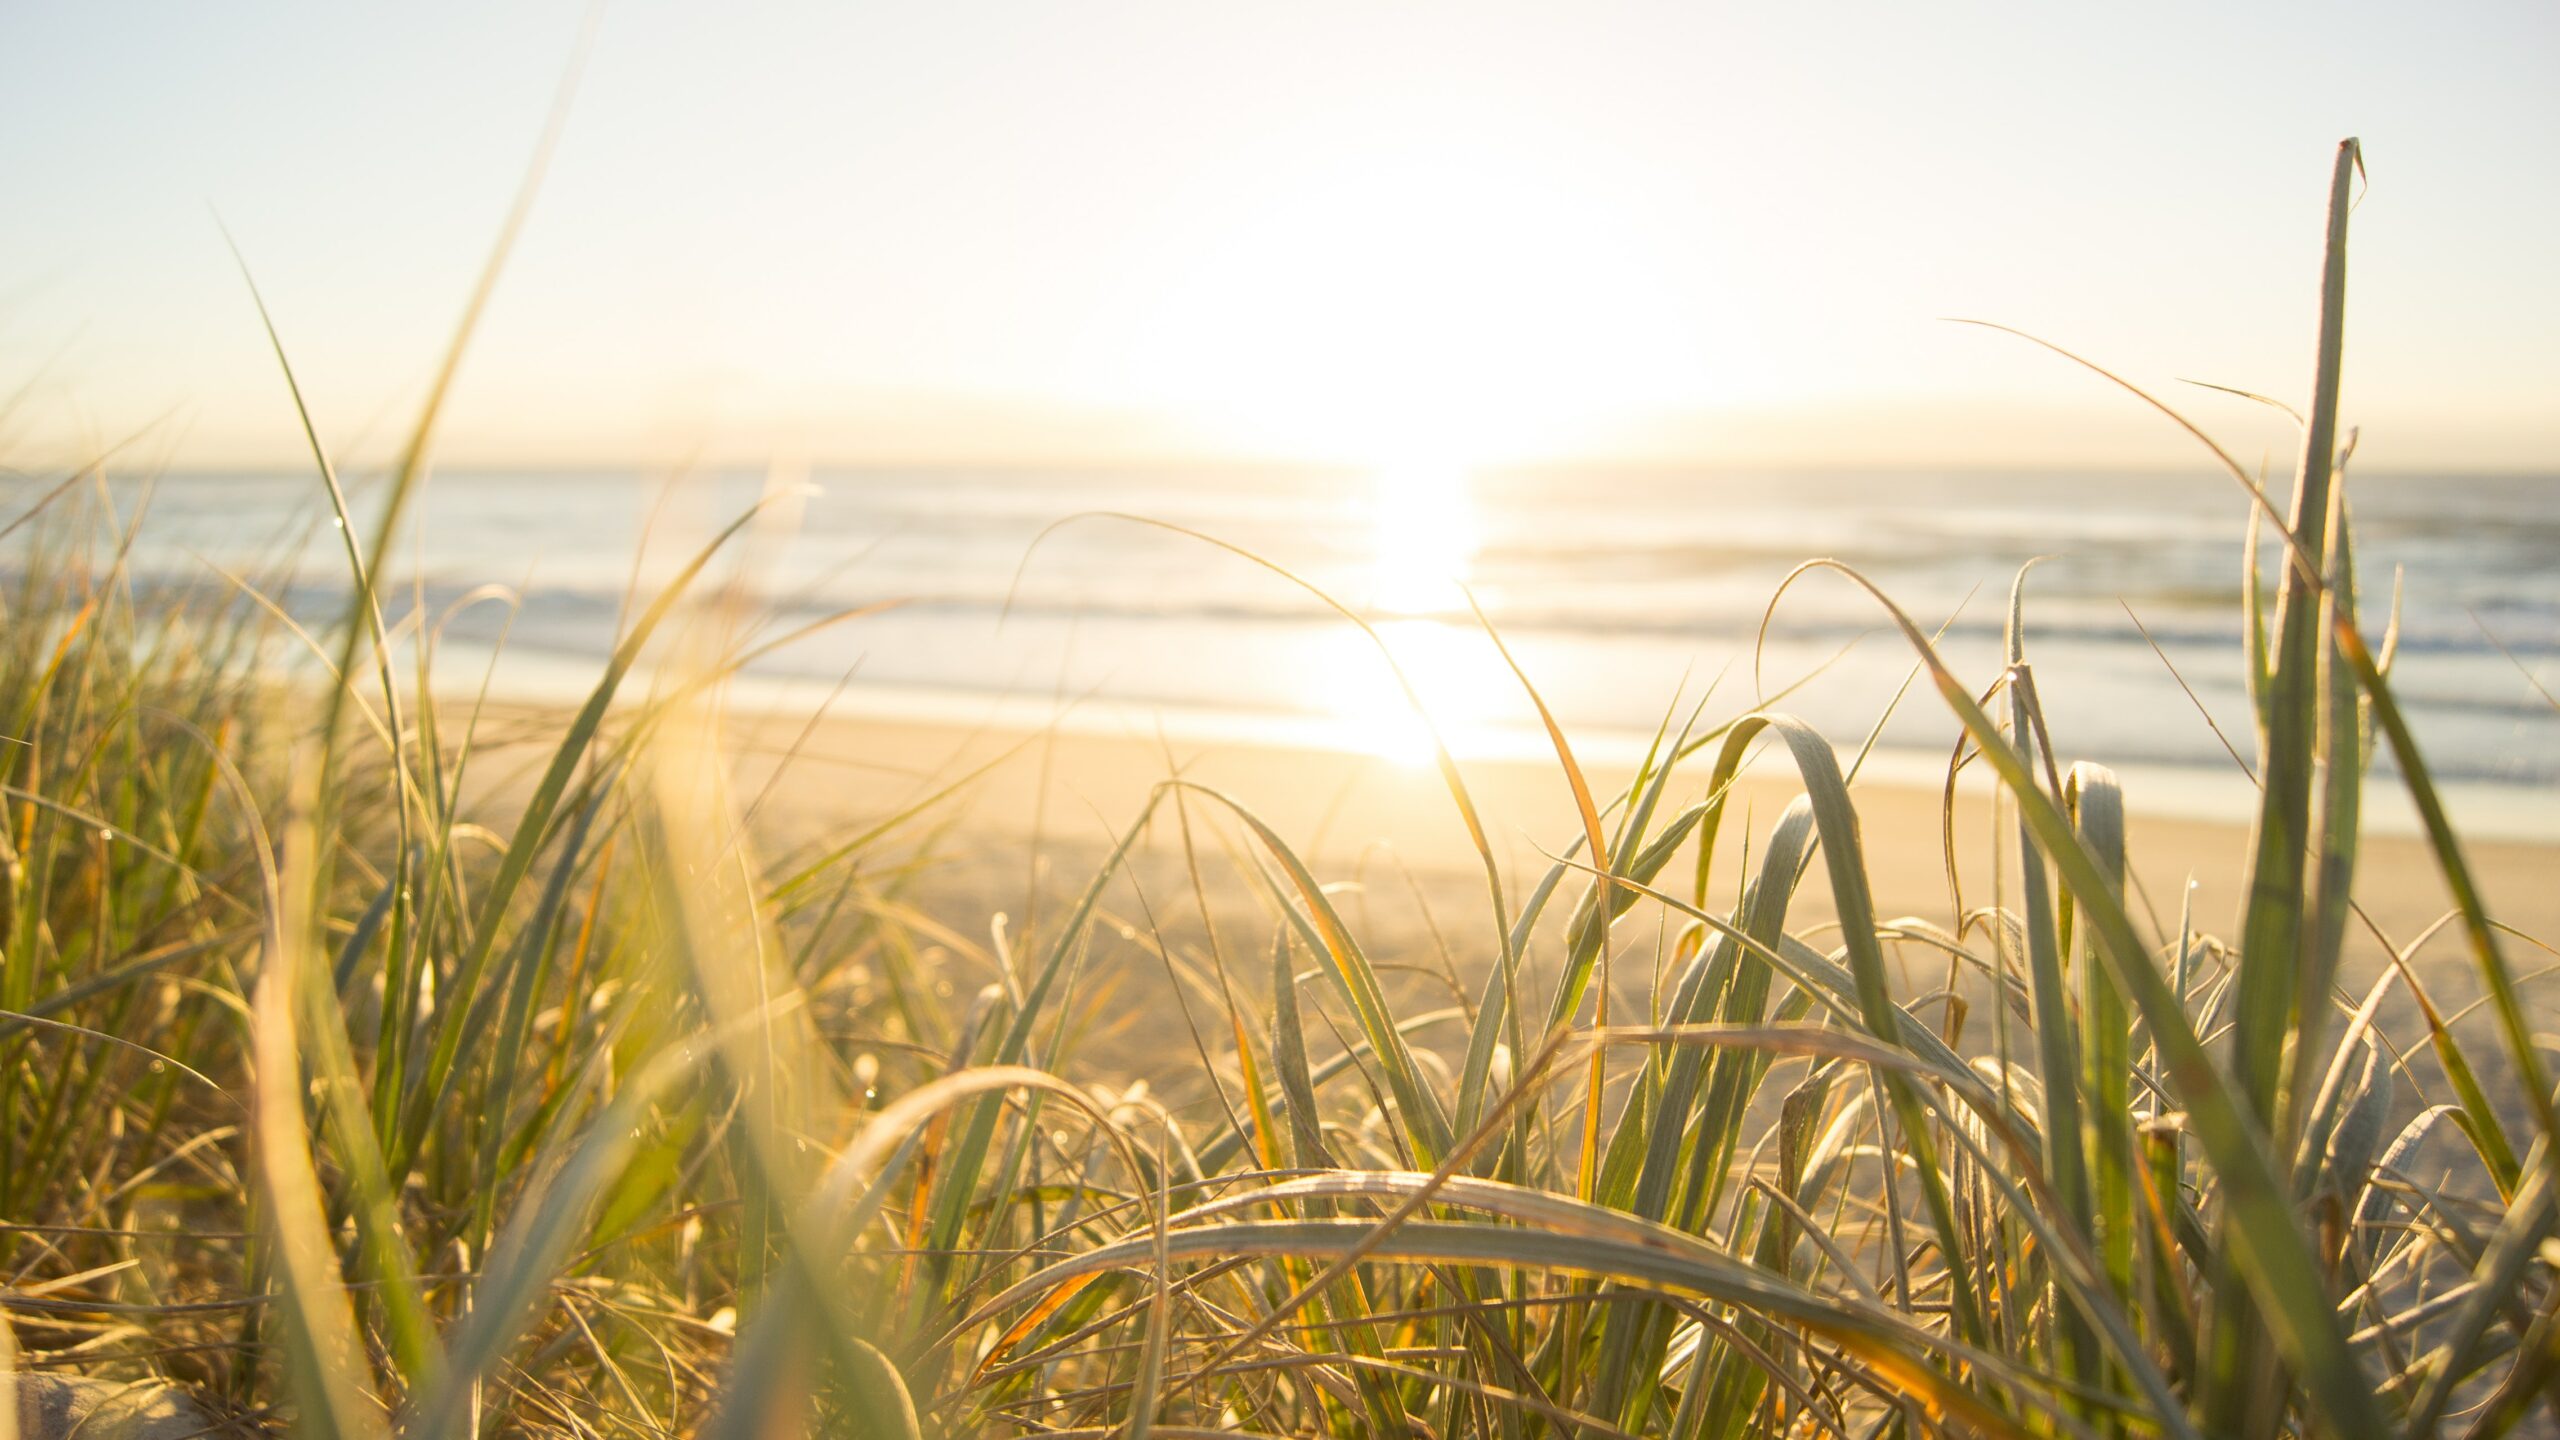 Landscape photo of sunrise over a beach. The photo is taken through grass on a dune looking down to calm waves and into the sun.